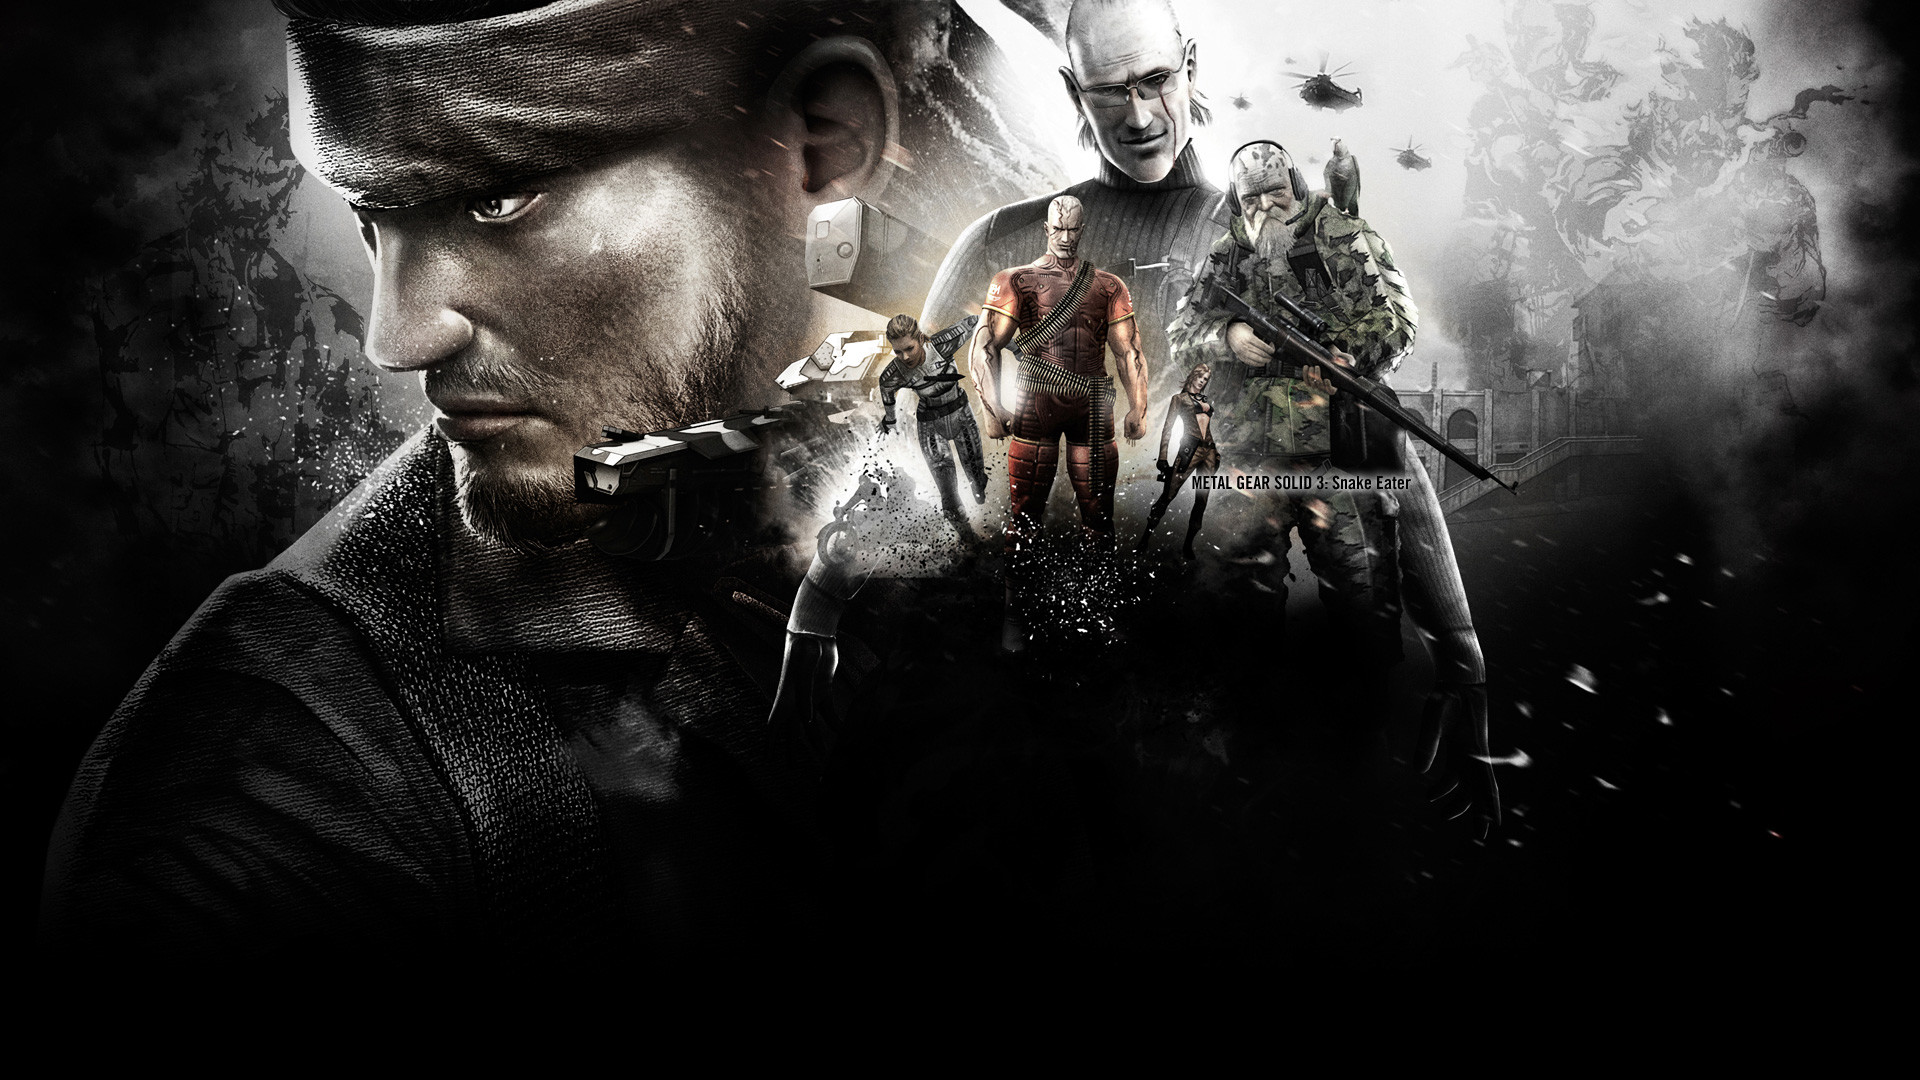 1920x1080 Metal Gear Solid HD Wallpapers and Backgrounds | HD Wallpapers | Pinterest  | Metal gear solid, Metal gear and Hd wallpaper